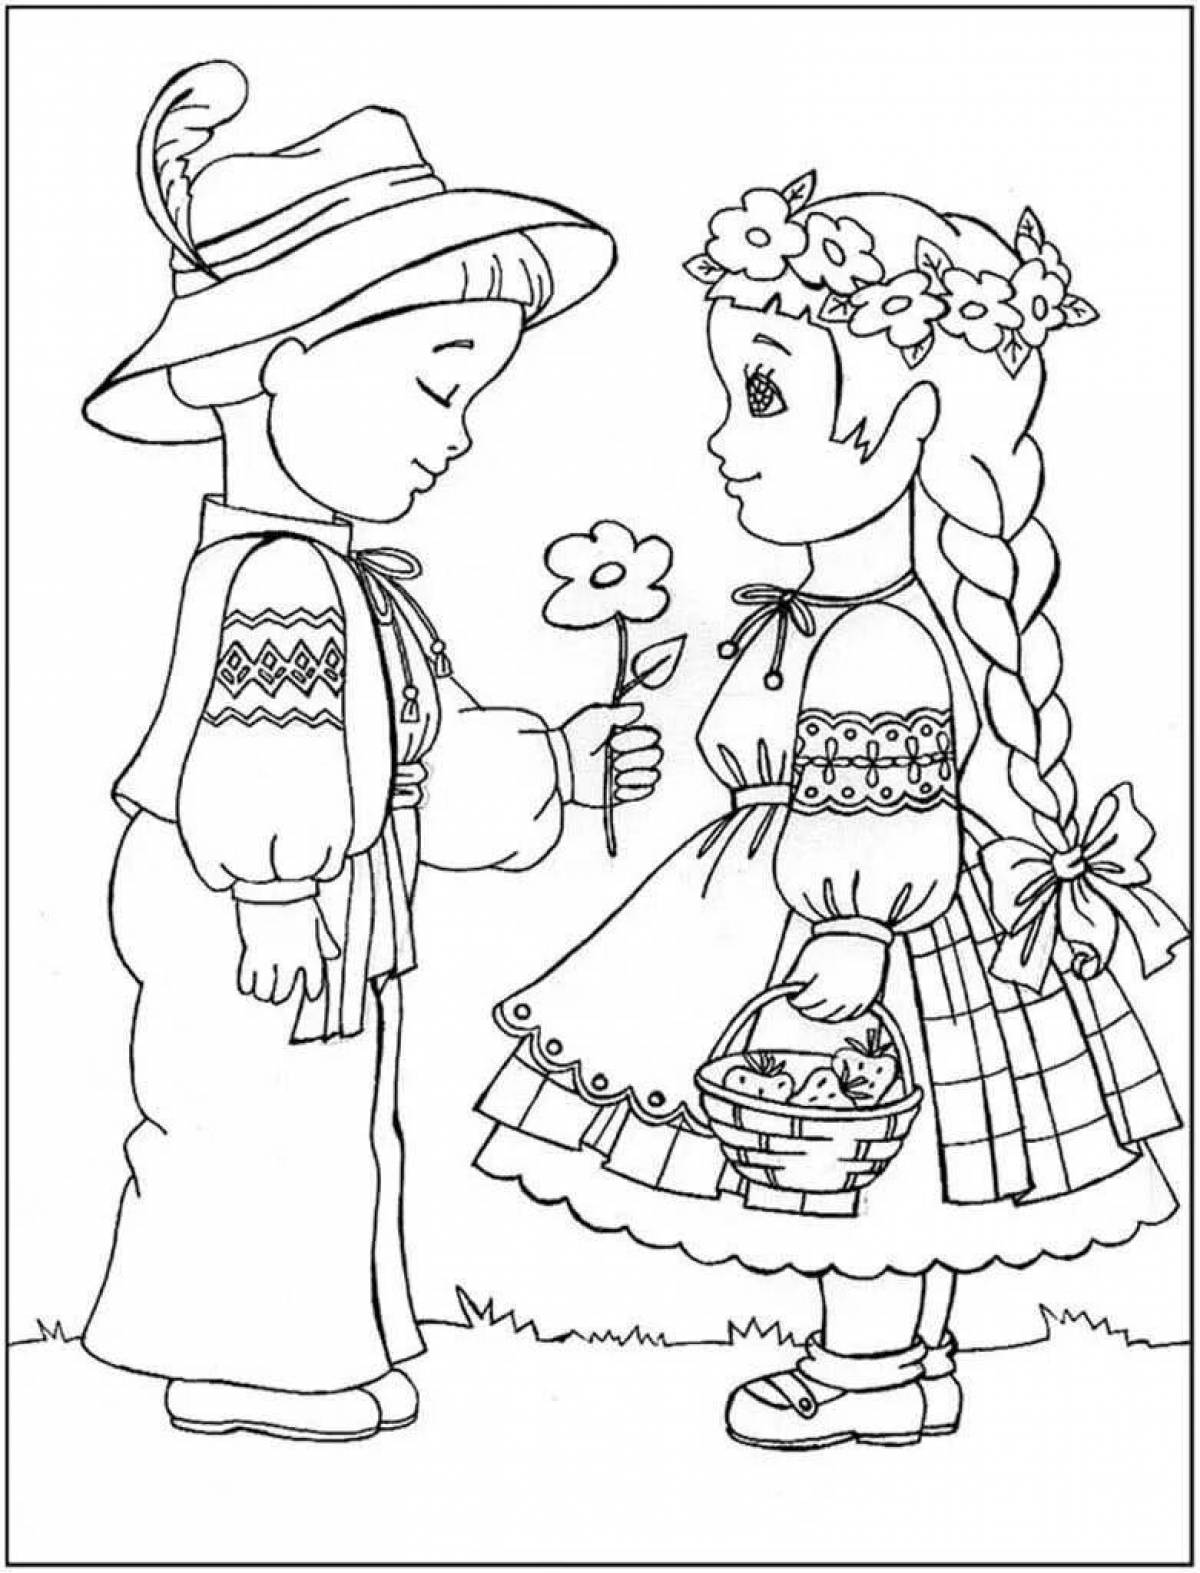 Glorious Cossack coloring page